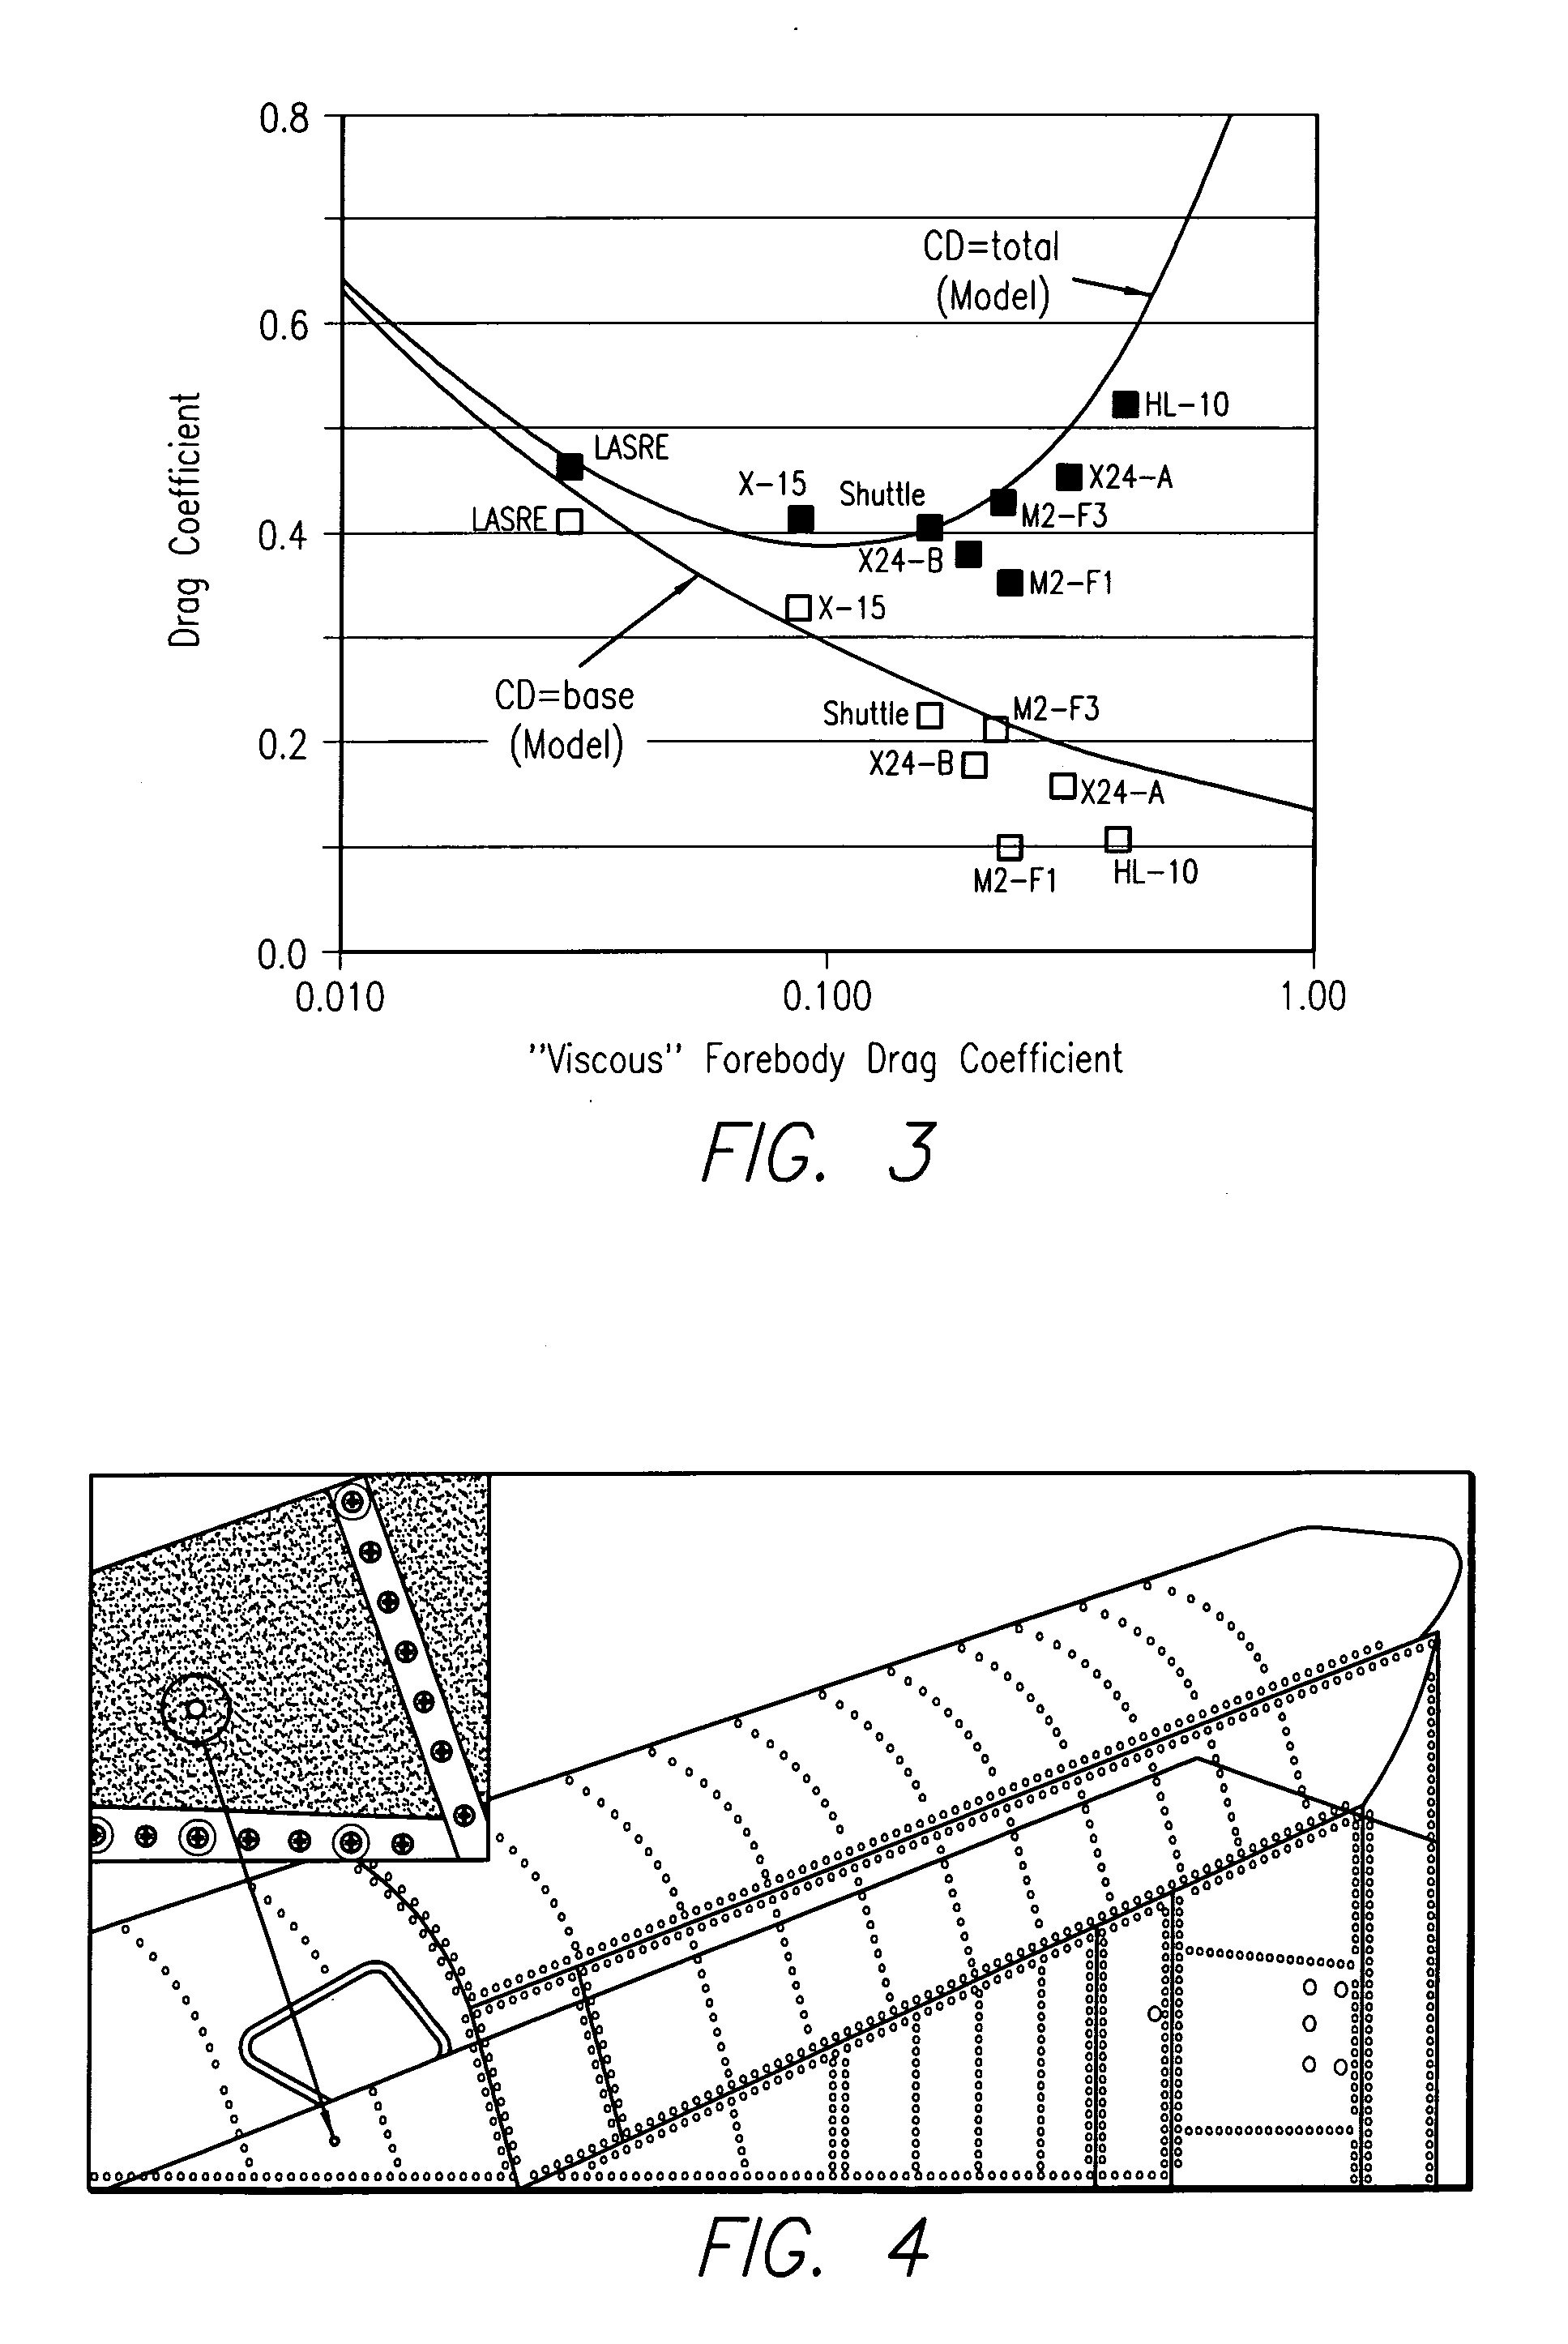 Method for reducing the drag of blunt-based vehicles by adaptively increasing forebody roughness